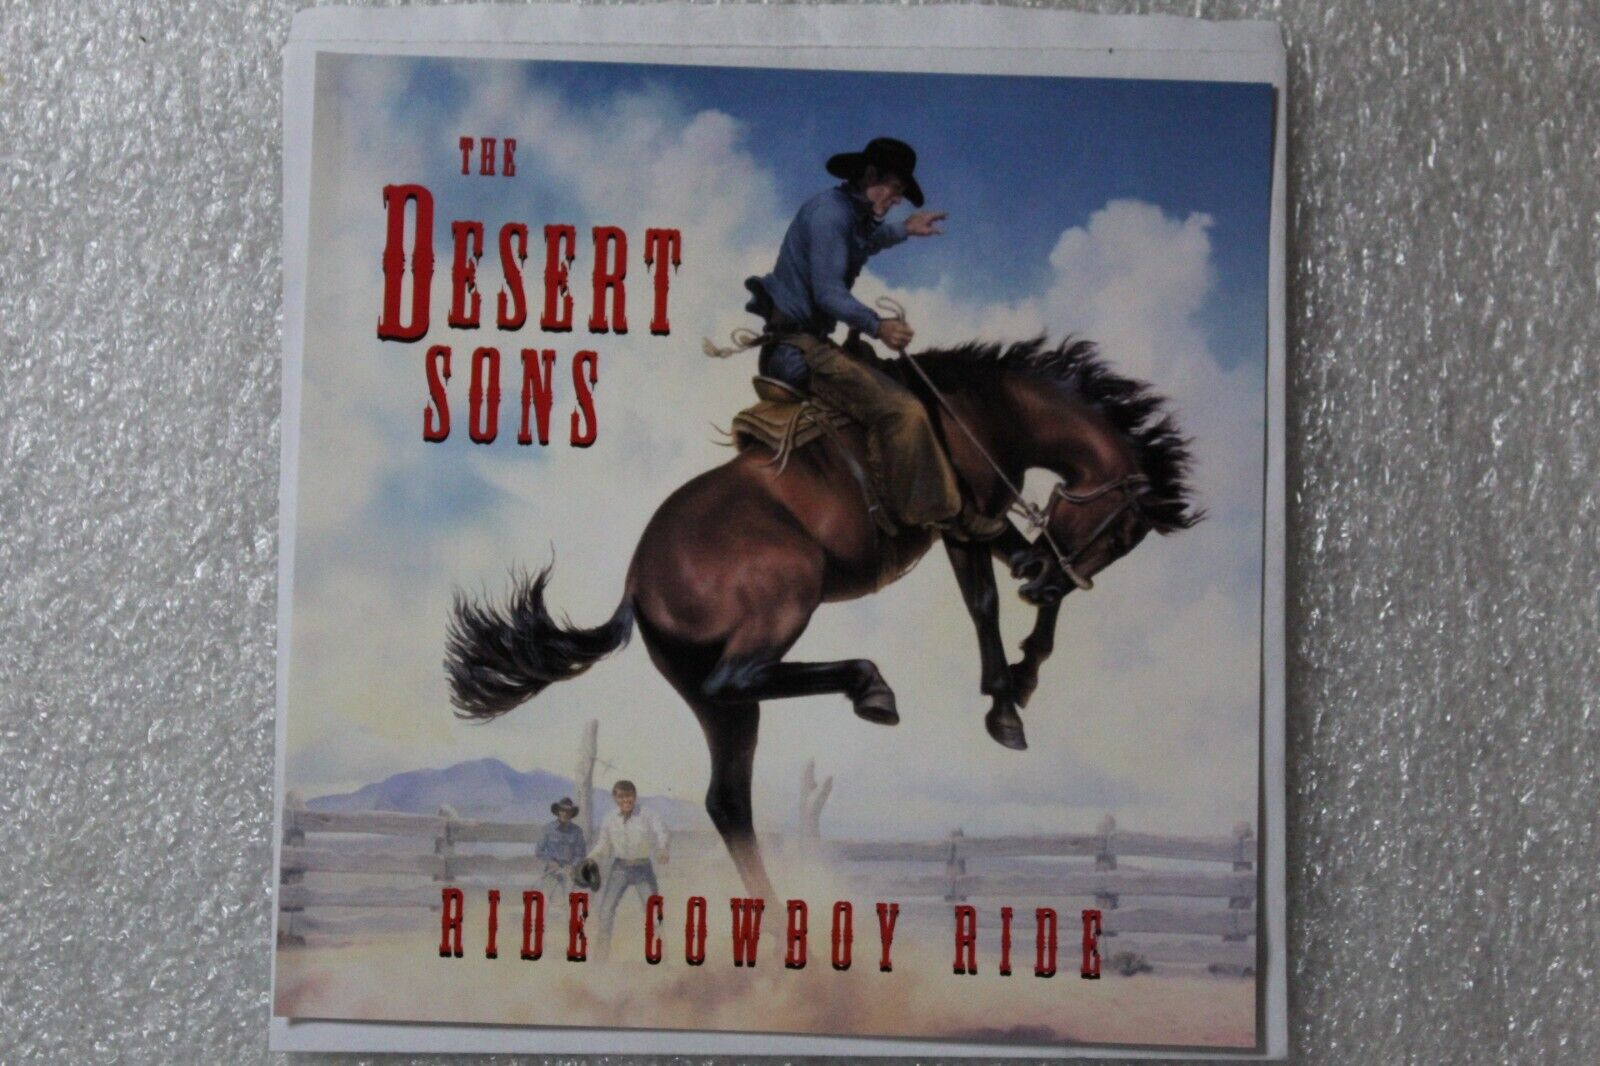 The Desert Sons - Ride Cowboy Ride CD Traditional American West